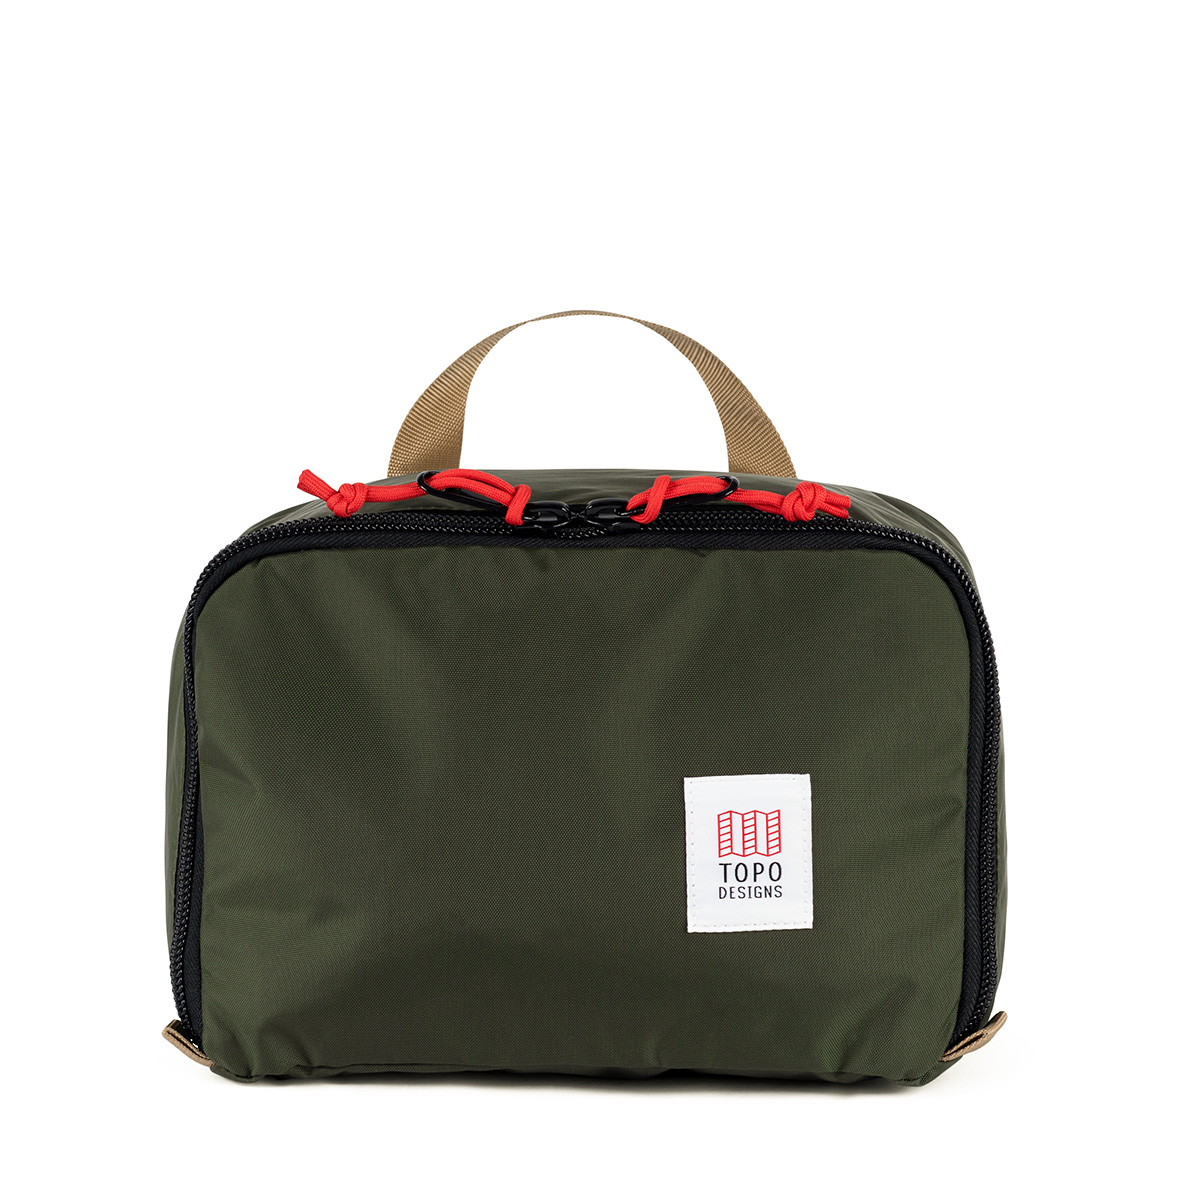 Topo Designs Pack Bag 10L Cube Olive, a simple, durable and highly functional way to organize your luggage